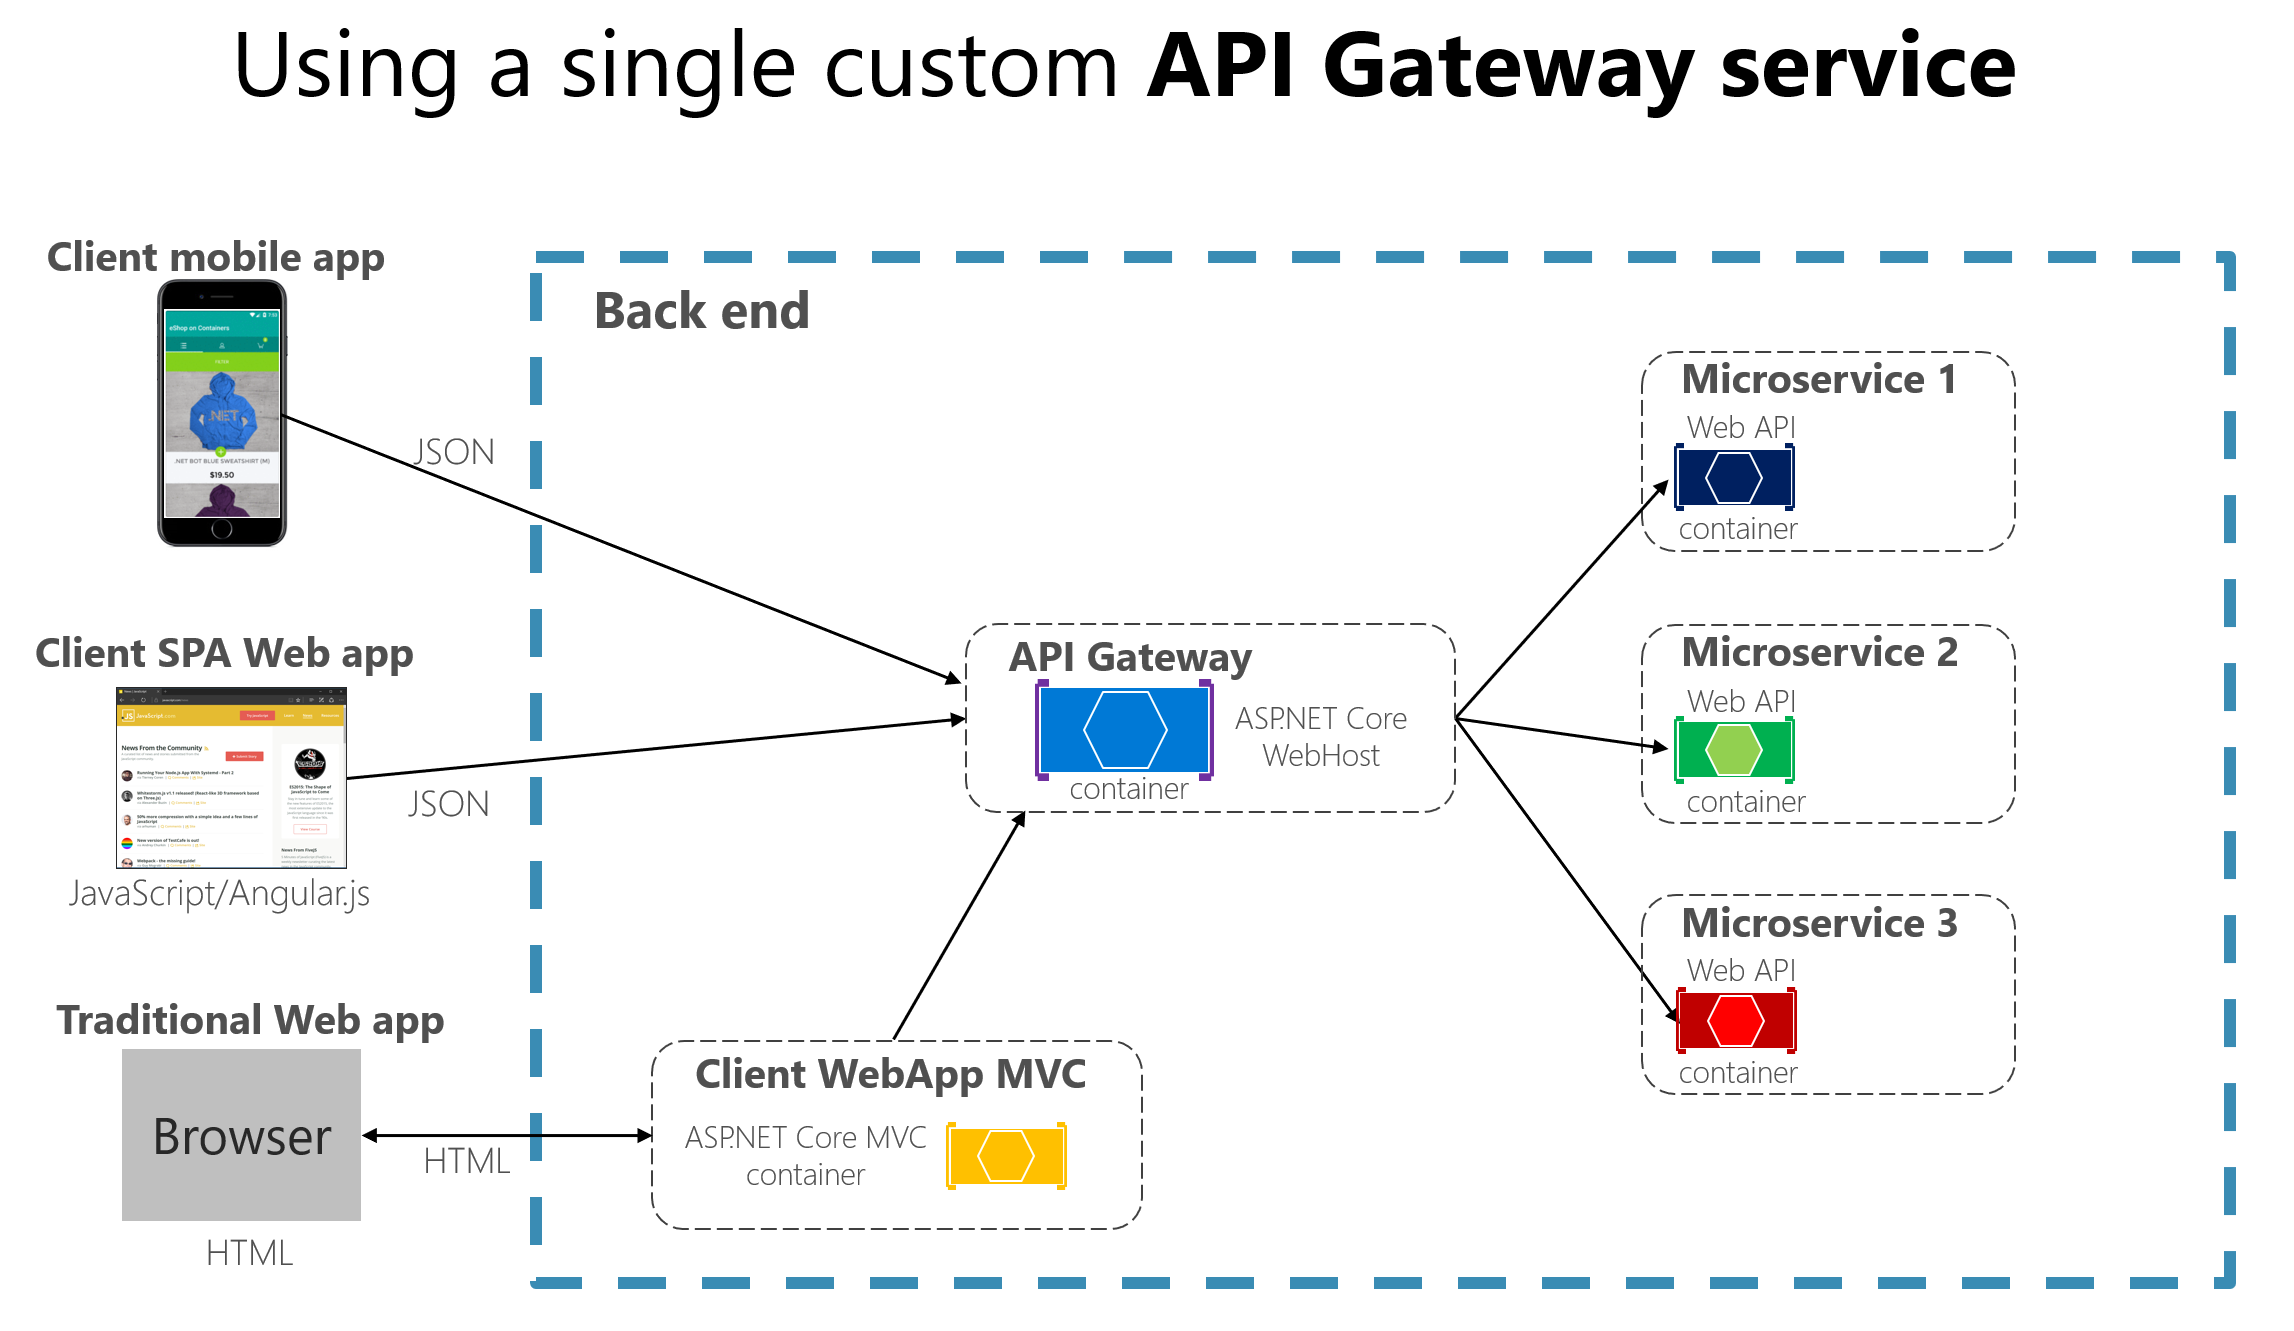 Diagram showing an API Gateway implemented as a custom service.